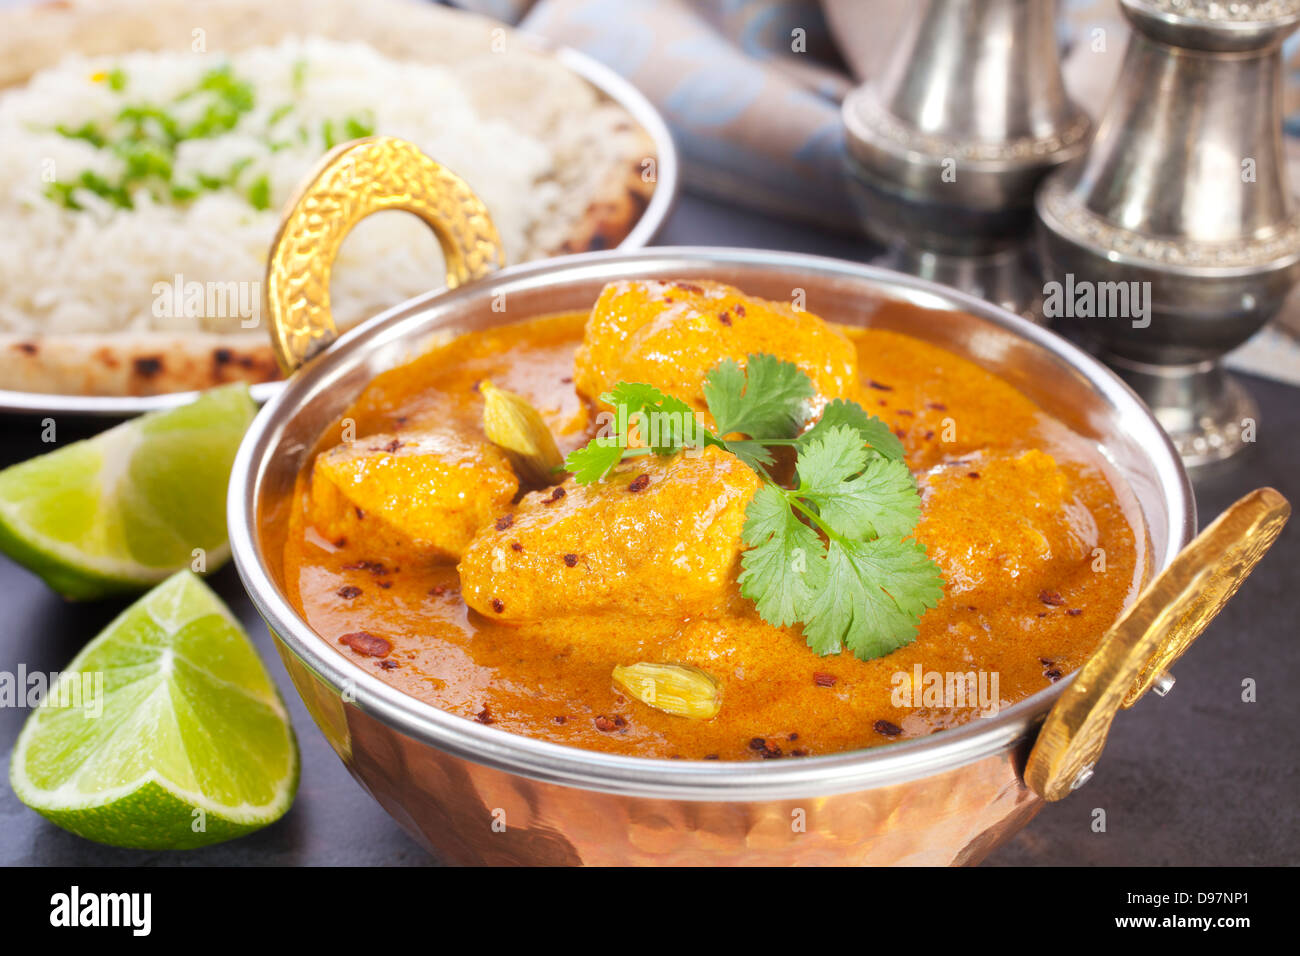 Butter Chicken Curry - favourite Indian meal, butter chicken with basmati rice, naan bread and lime. Stock Photo